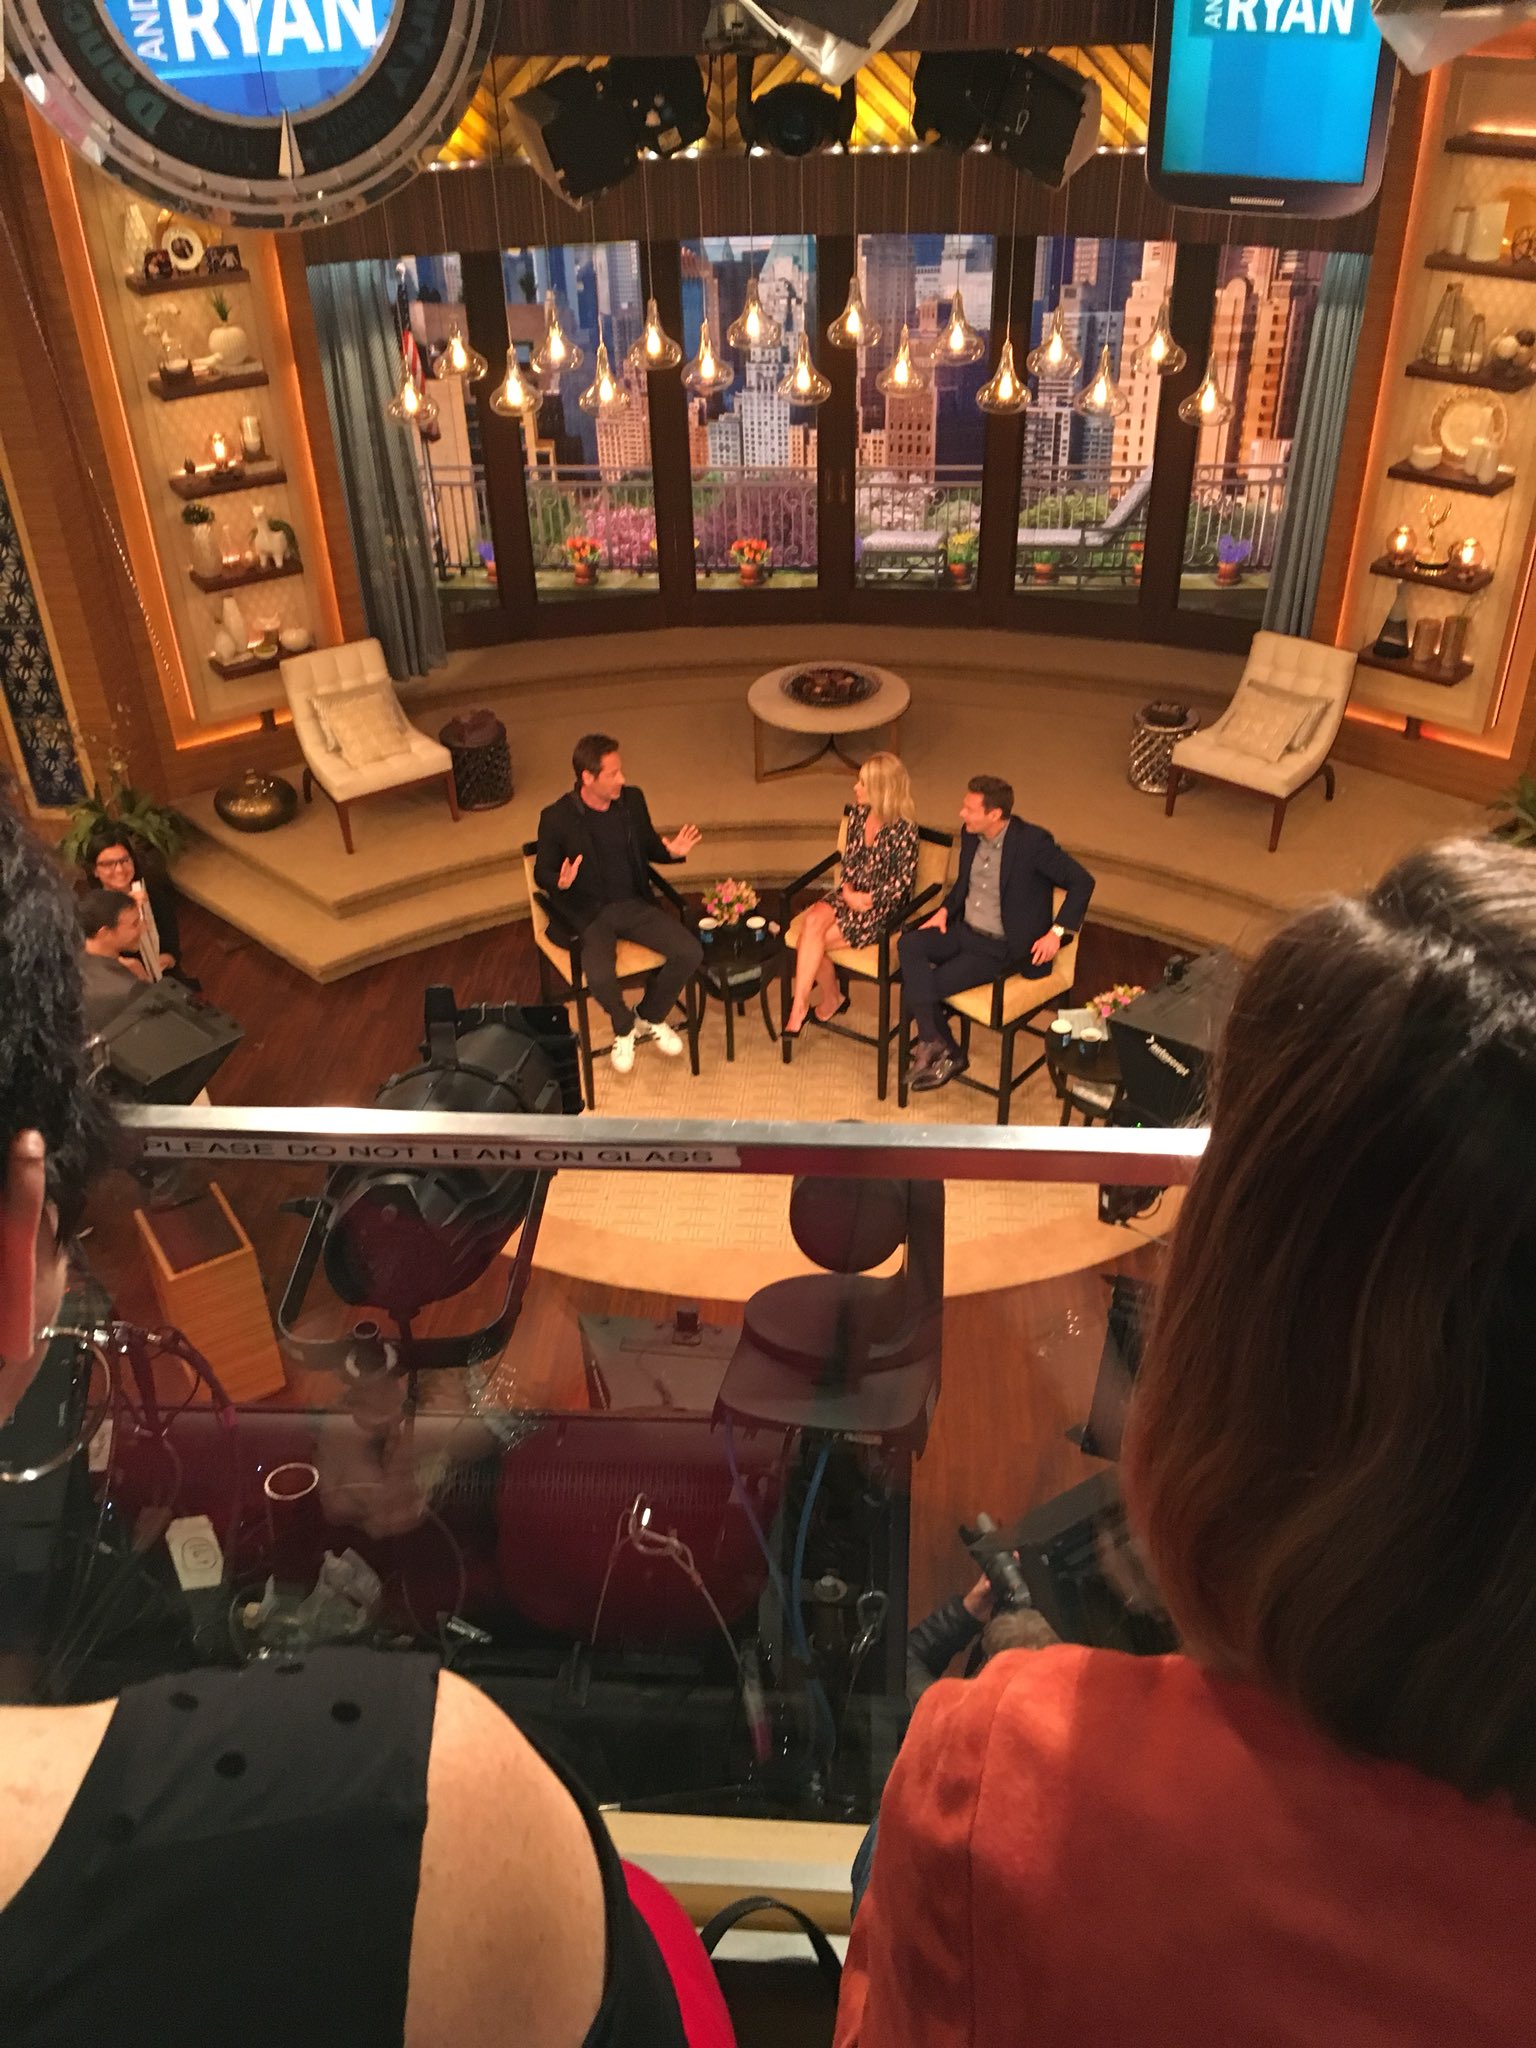 2018/04/30 - David on Live with Kelly and Ryan DcCPD--W0AEmr0F